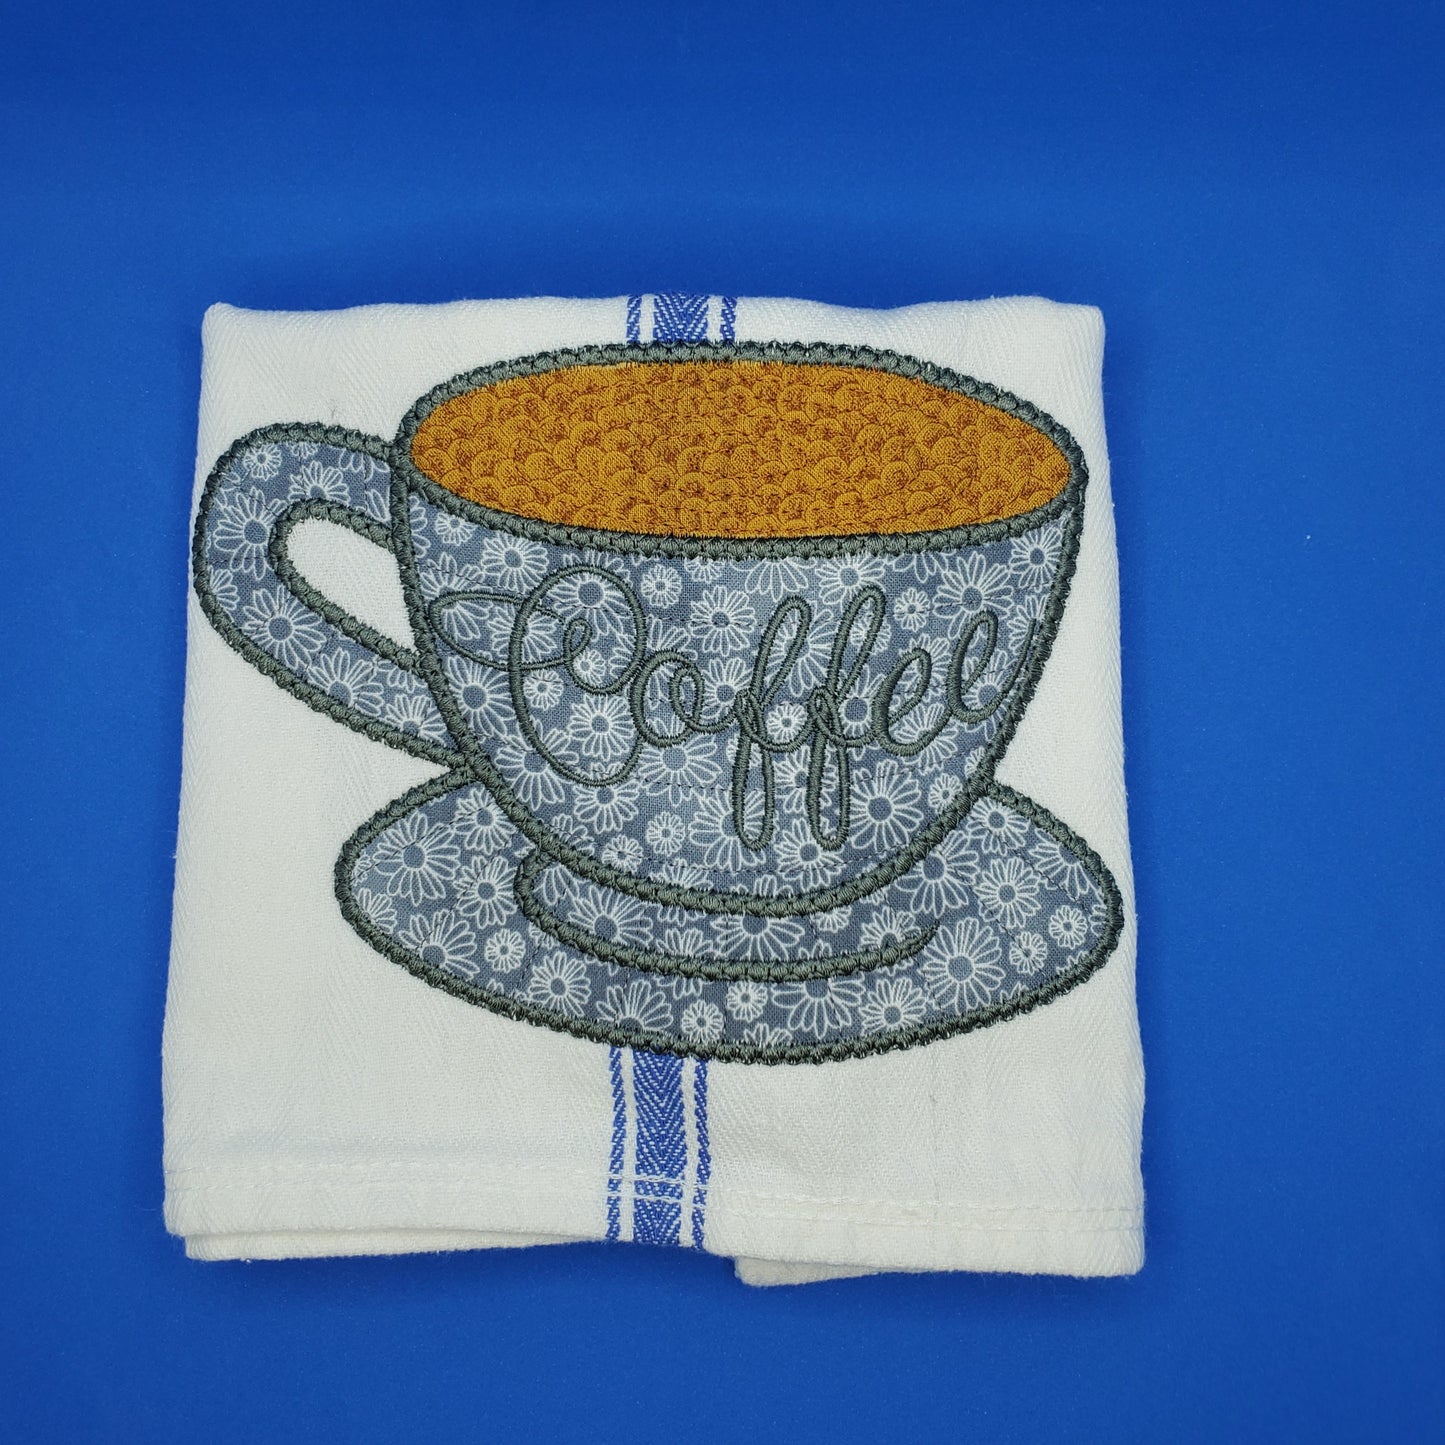 Coffee Cup Theme Applique on blue striped towel